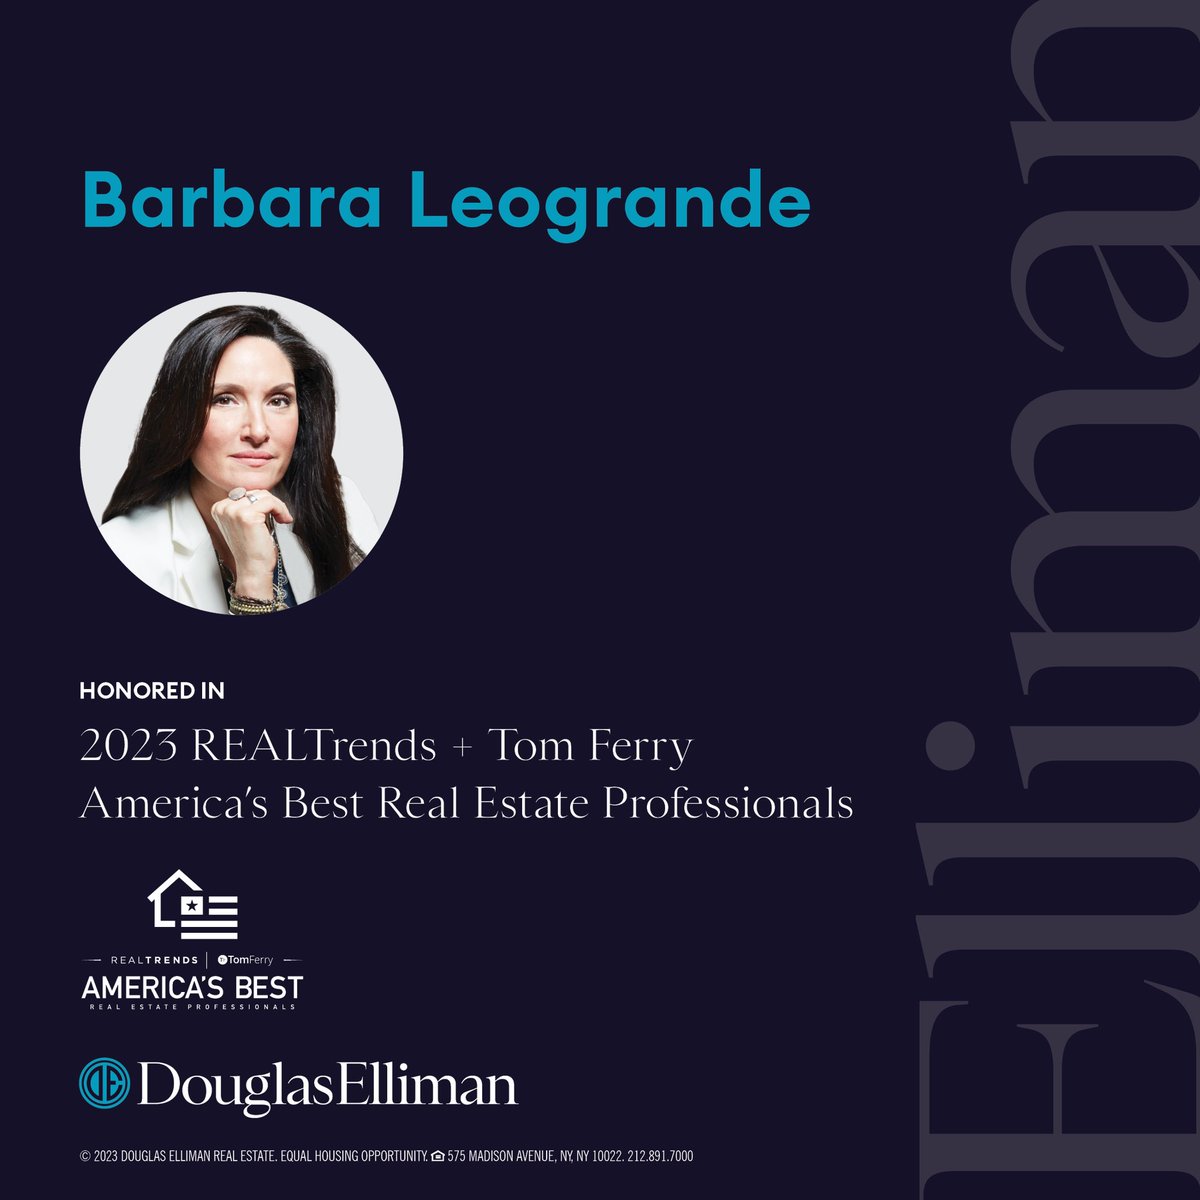 This accomplishment would not be possible without the support and trust of my amazing clients. If you are interested in buying or selling, I am here to guide you every step of the way! 🩵 #EllimanAgents #DouglasElliman #TheNextMoveIsYours ✨
.
.
.
.
#SoldByBarbara #CallBarbara